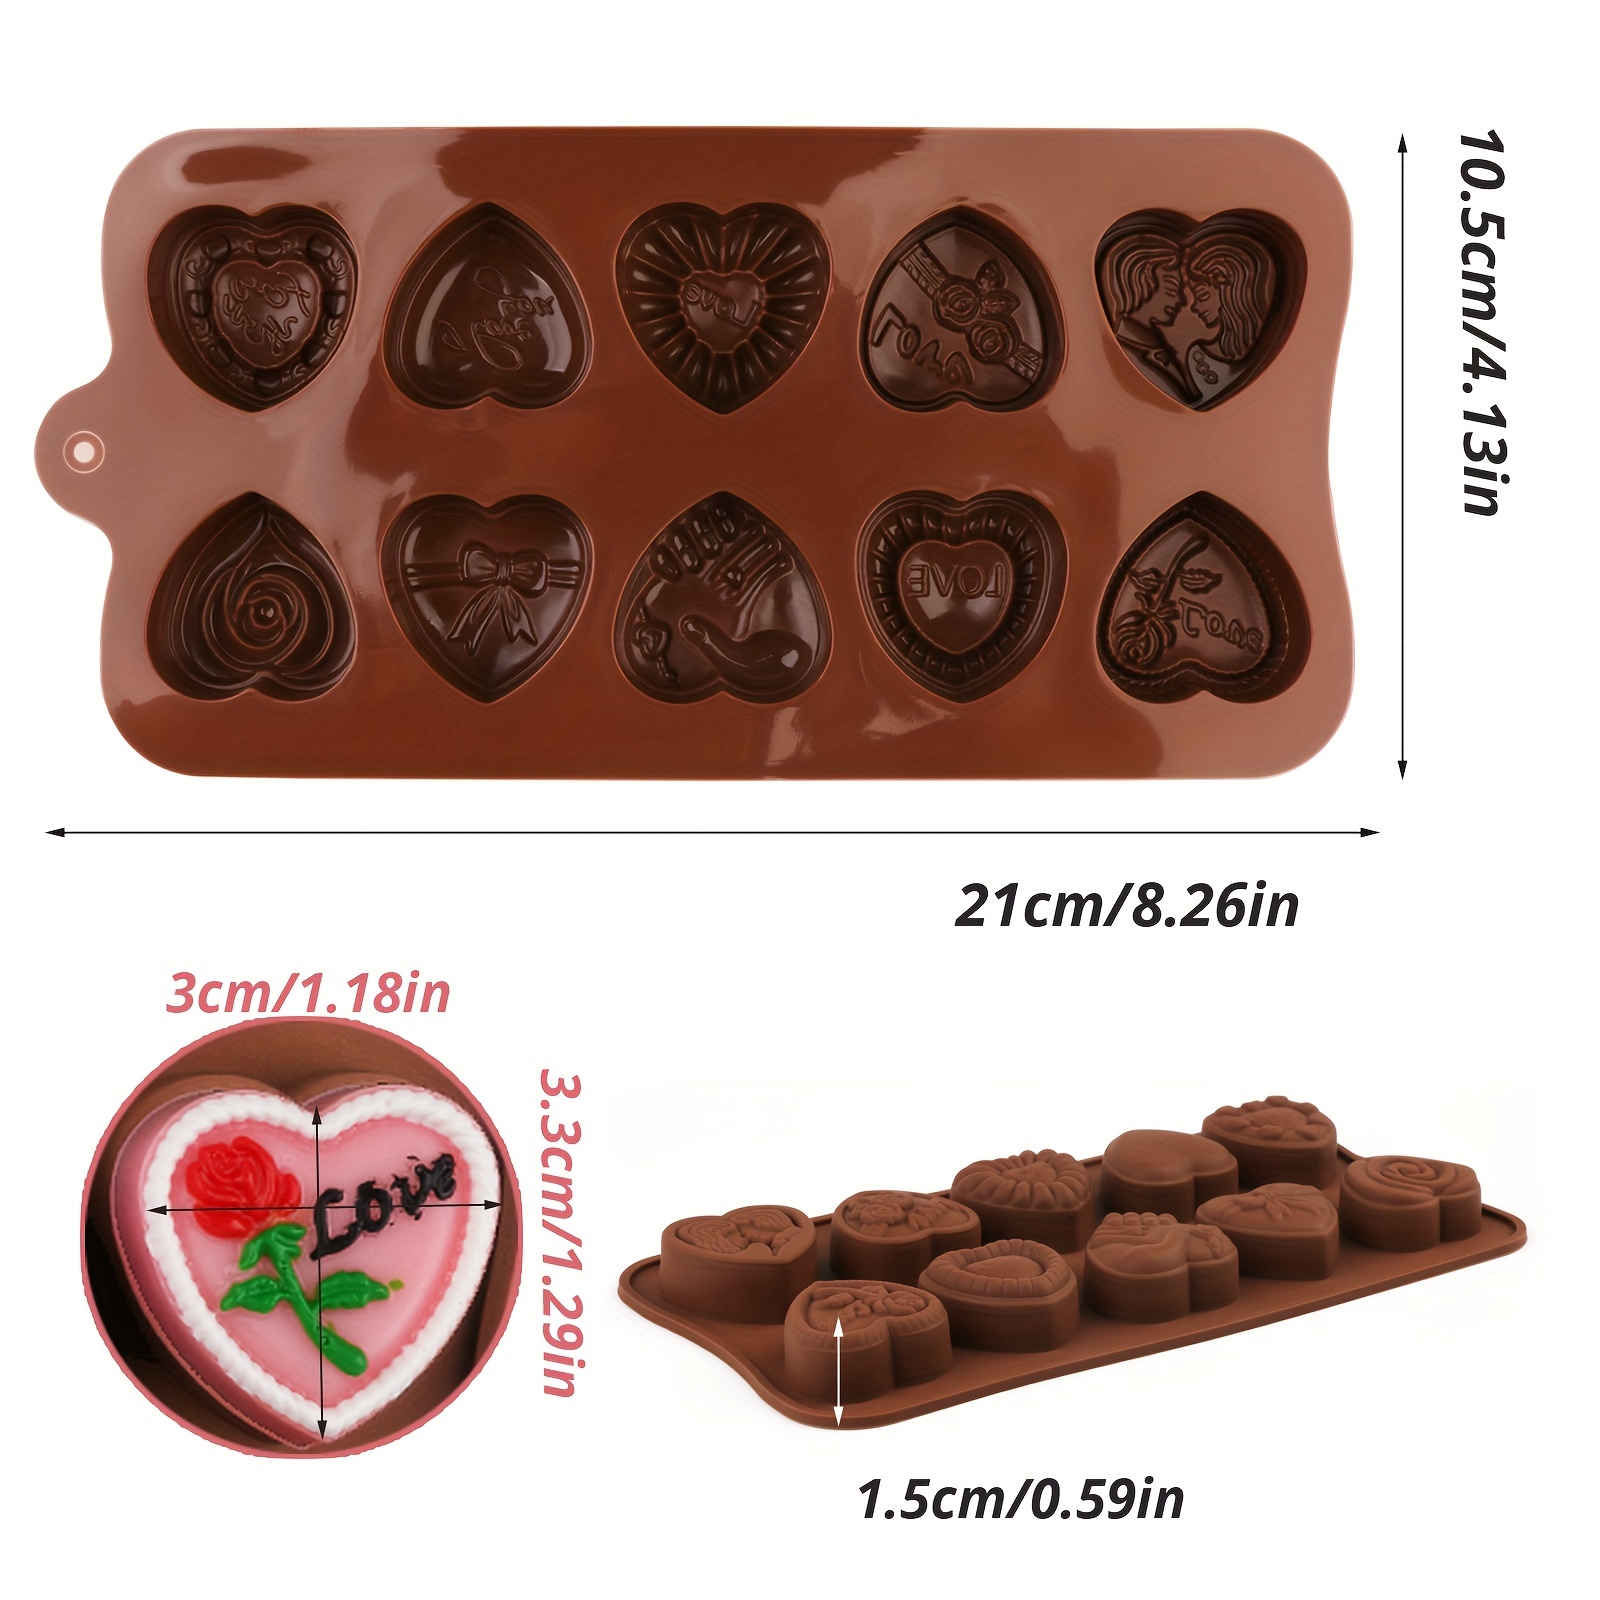 Buy KARIMOTECH Chocolate Silicone Molds Shapes for DIY Heart Love